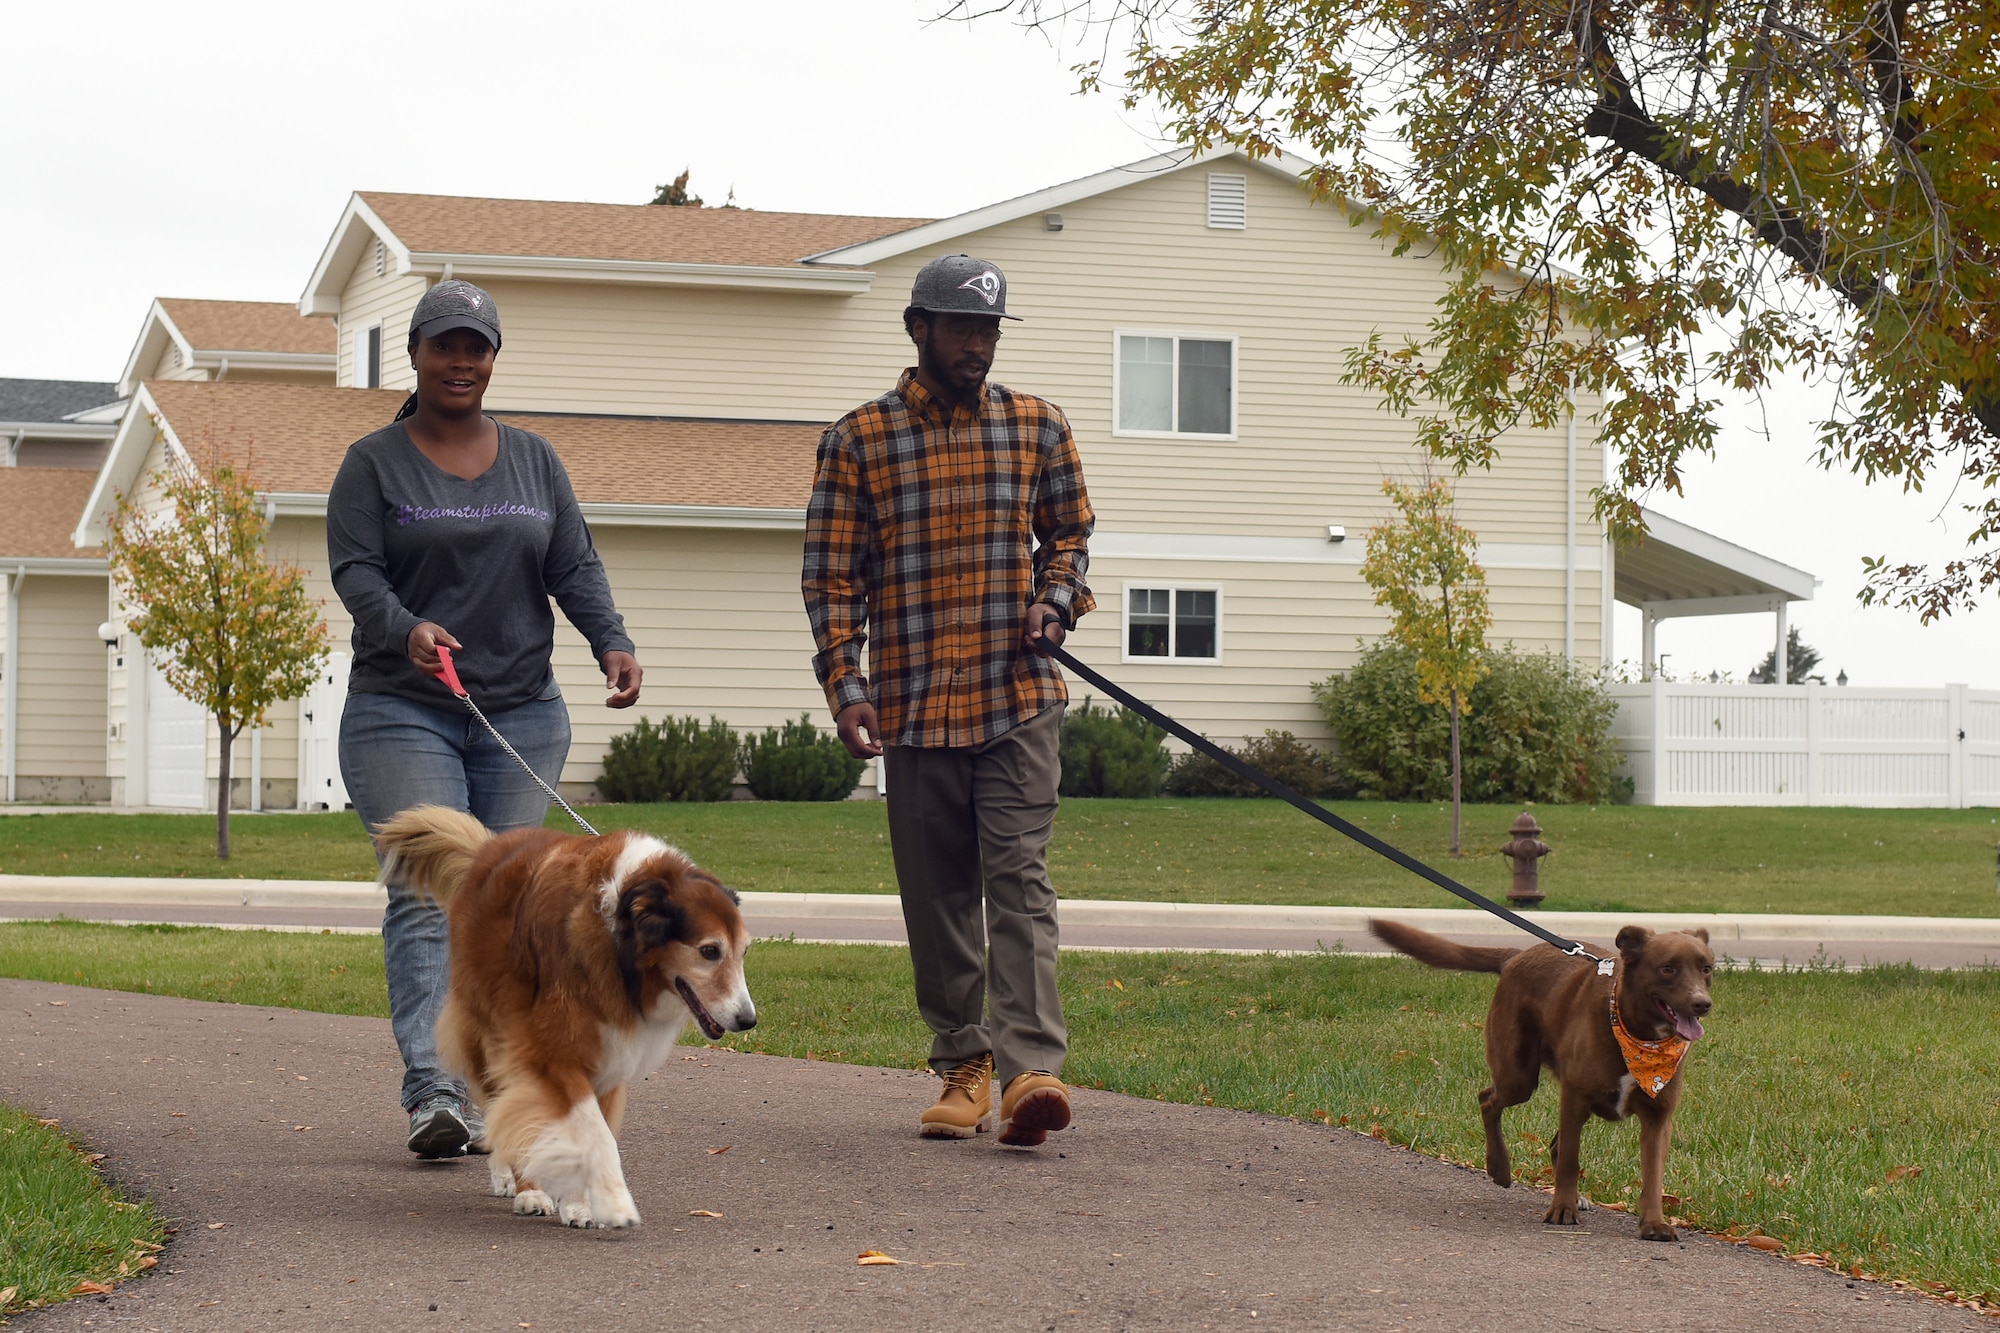 Capt. Brittany Rhanes, 341st Operations Support Squadron intercontinental ballistic missile emergency war order planner, and her husband Anthony, walk their dogs Oct. 5, 2016, at Malmstrom Air Force Base, Mont. Rhanes was diagnosed with vulvar cancer Feb. 17, 2016, and made a promise to not let that stop her. (U.S. Air Force photo/Senior Airman Jaeda Tookes)